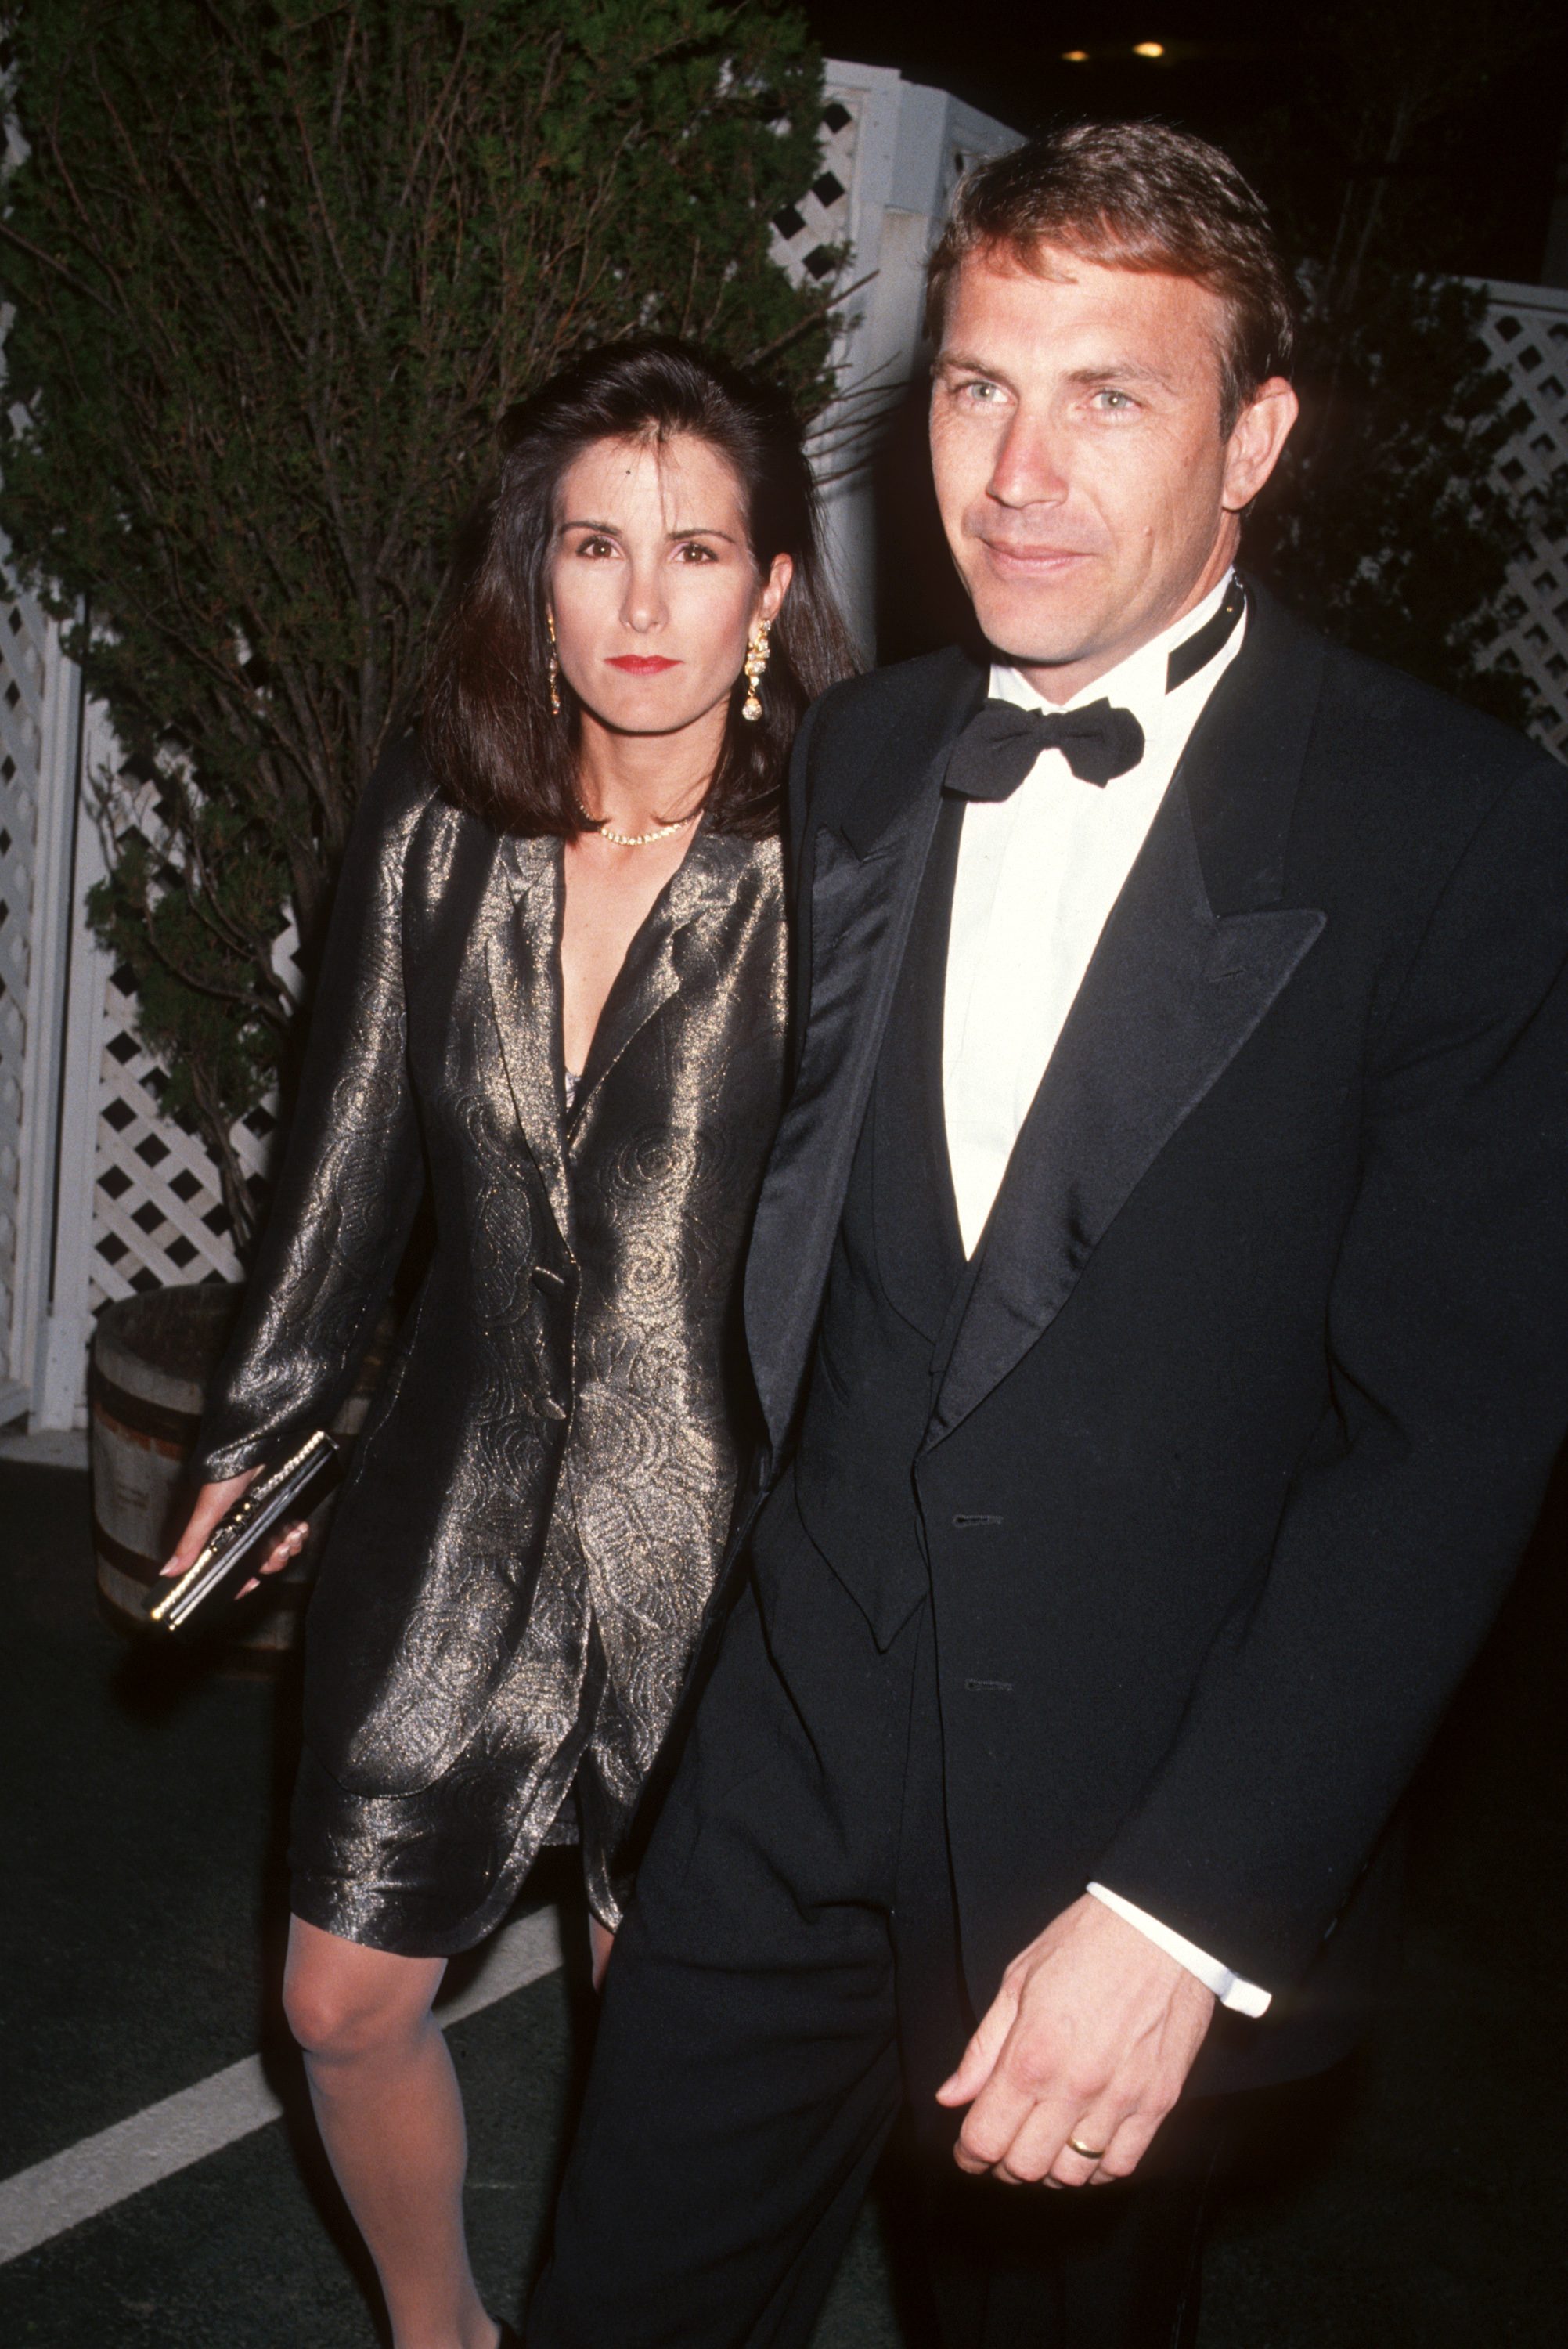 Cindy Silva and Kevin Costner at the 1st Annual Movie Awards in California, 1991. | Source: Getty Images